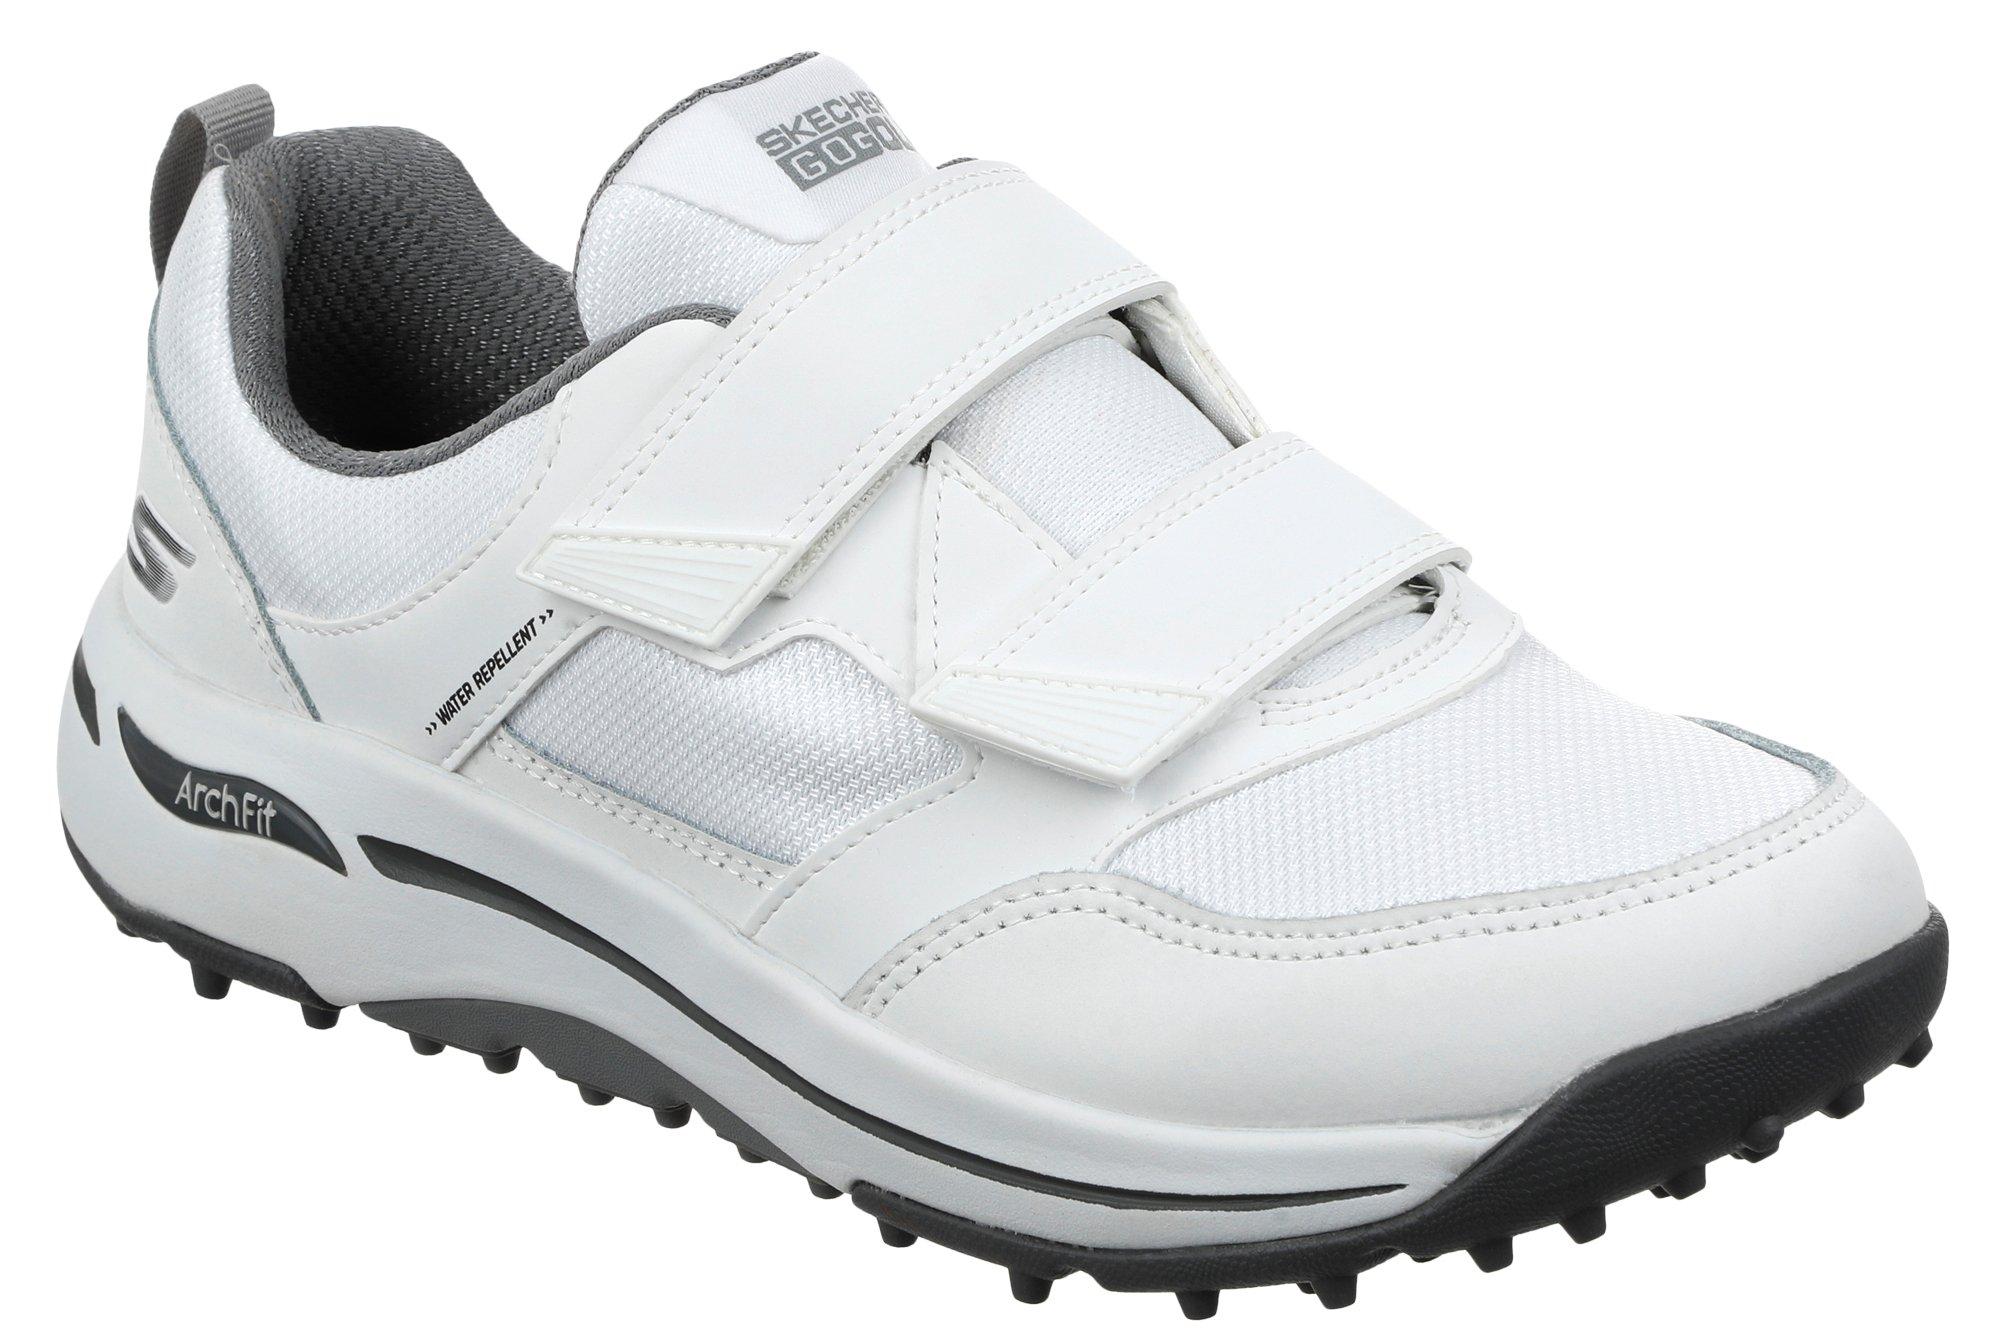 Women's Athletic Velcro Arch Fit Golf Shoes - White